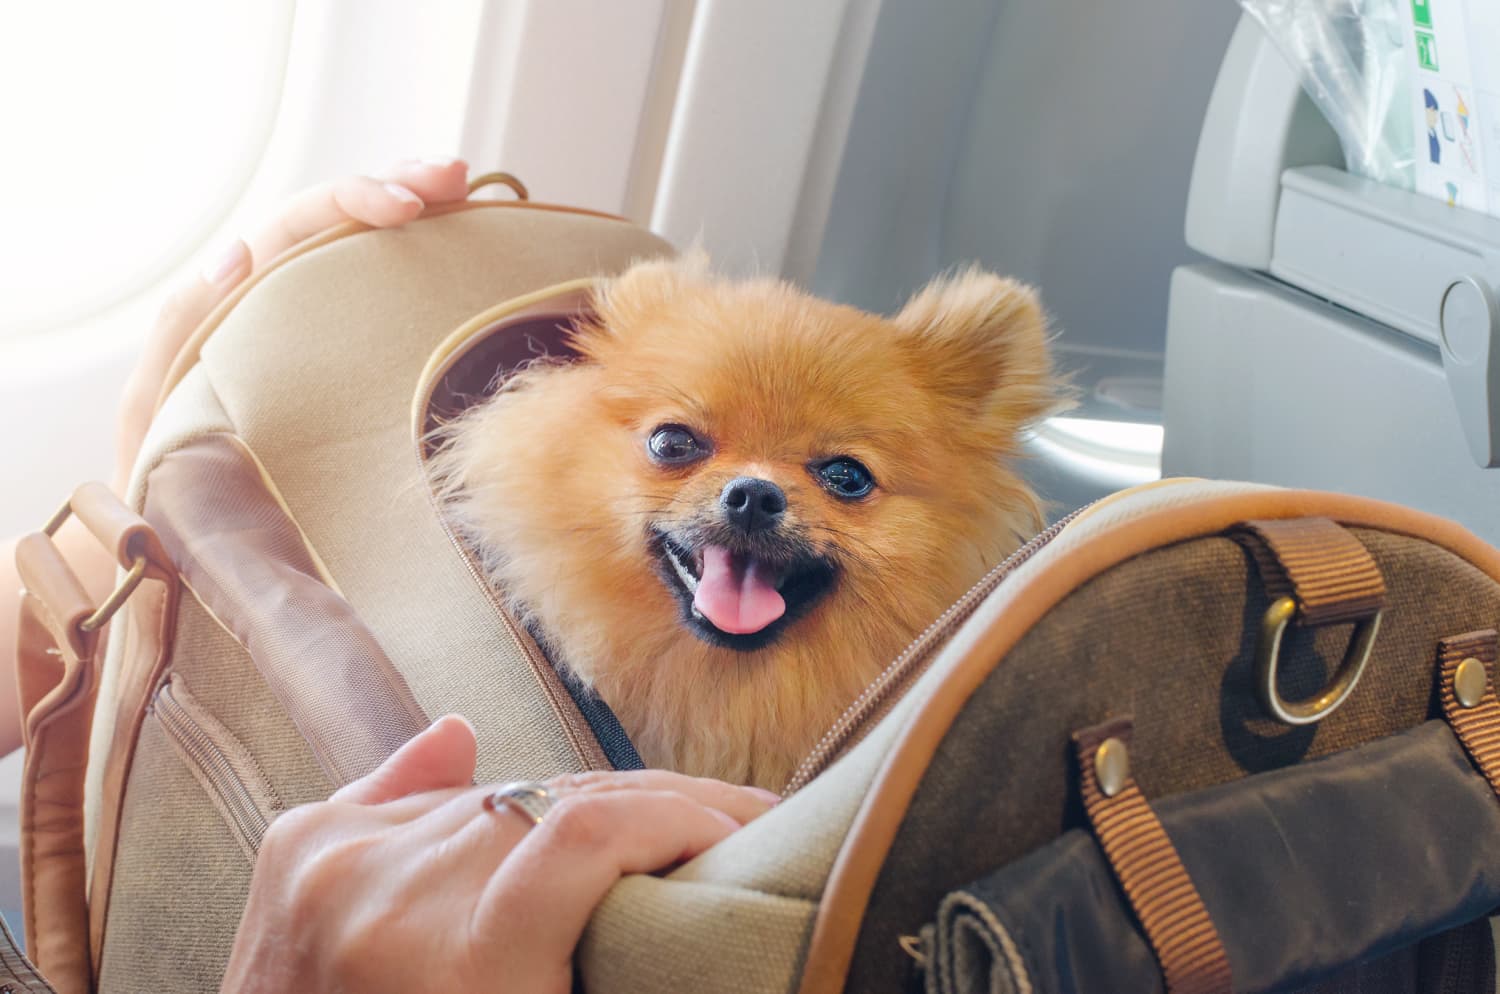 These Are the Most Pet-Friendly Airlines in 2022